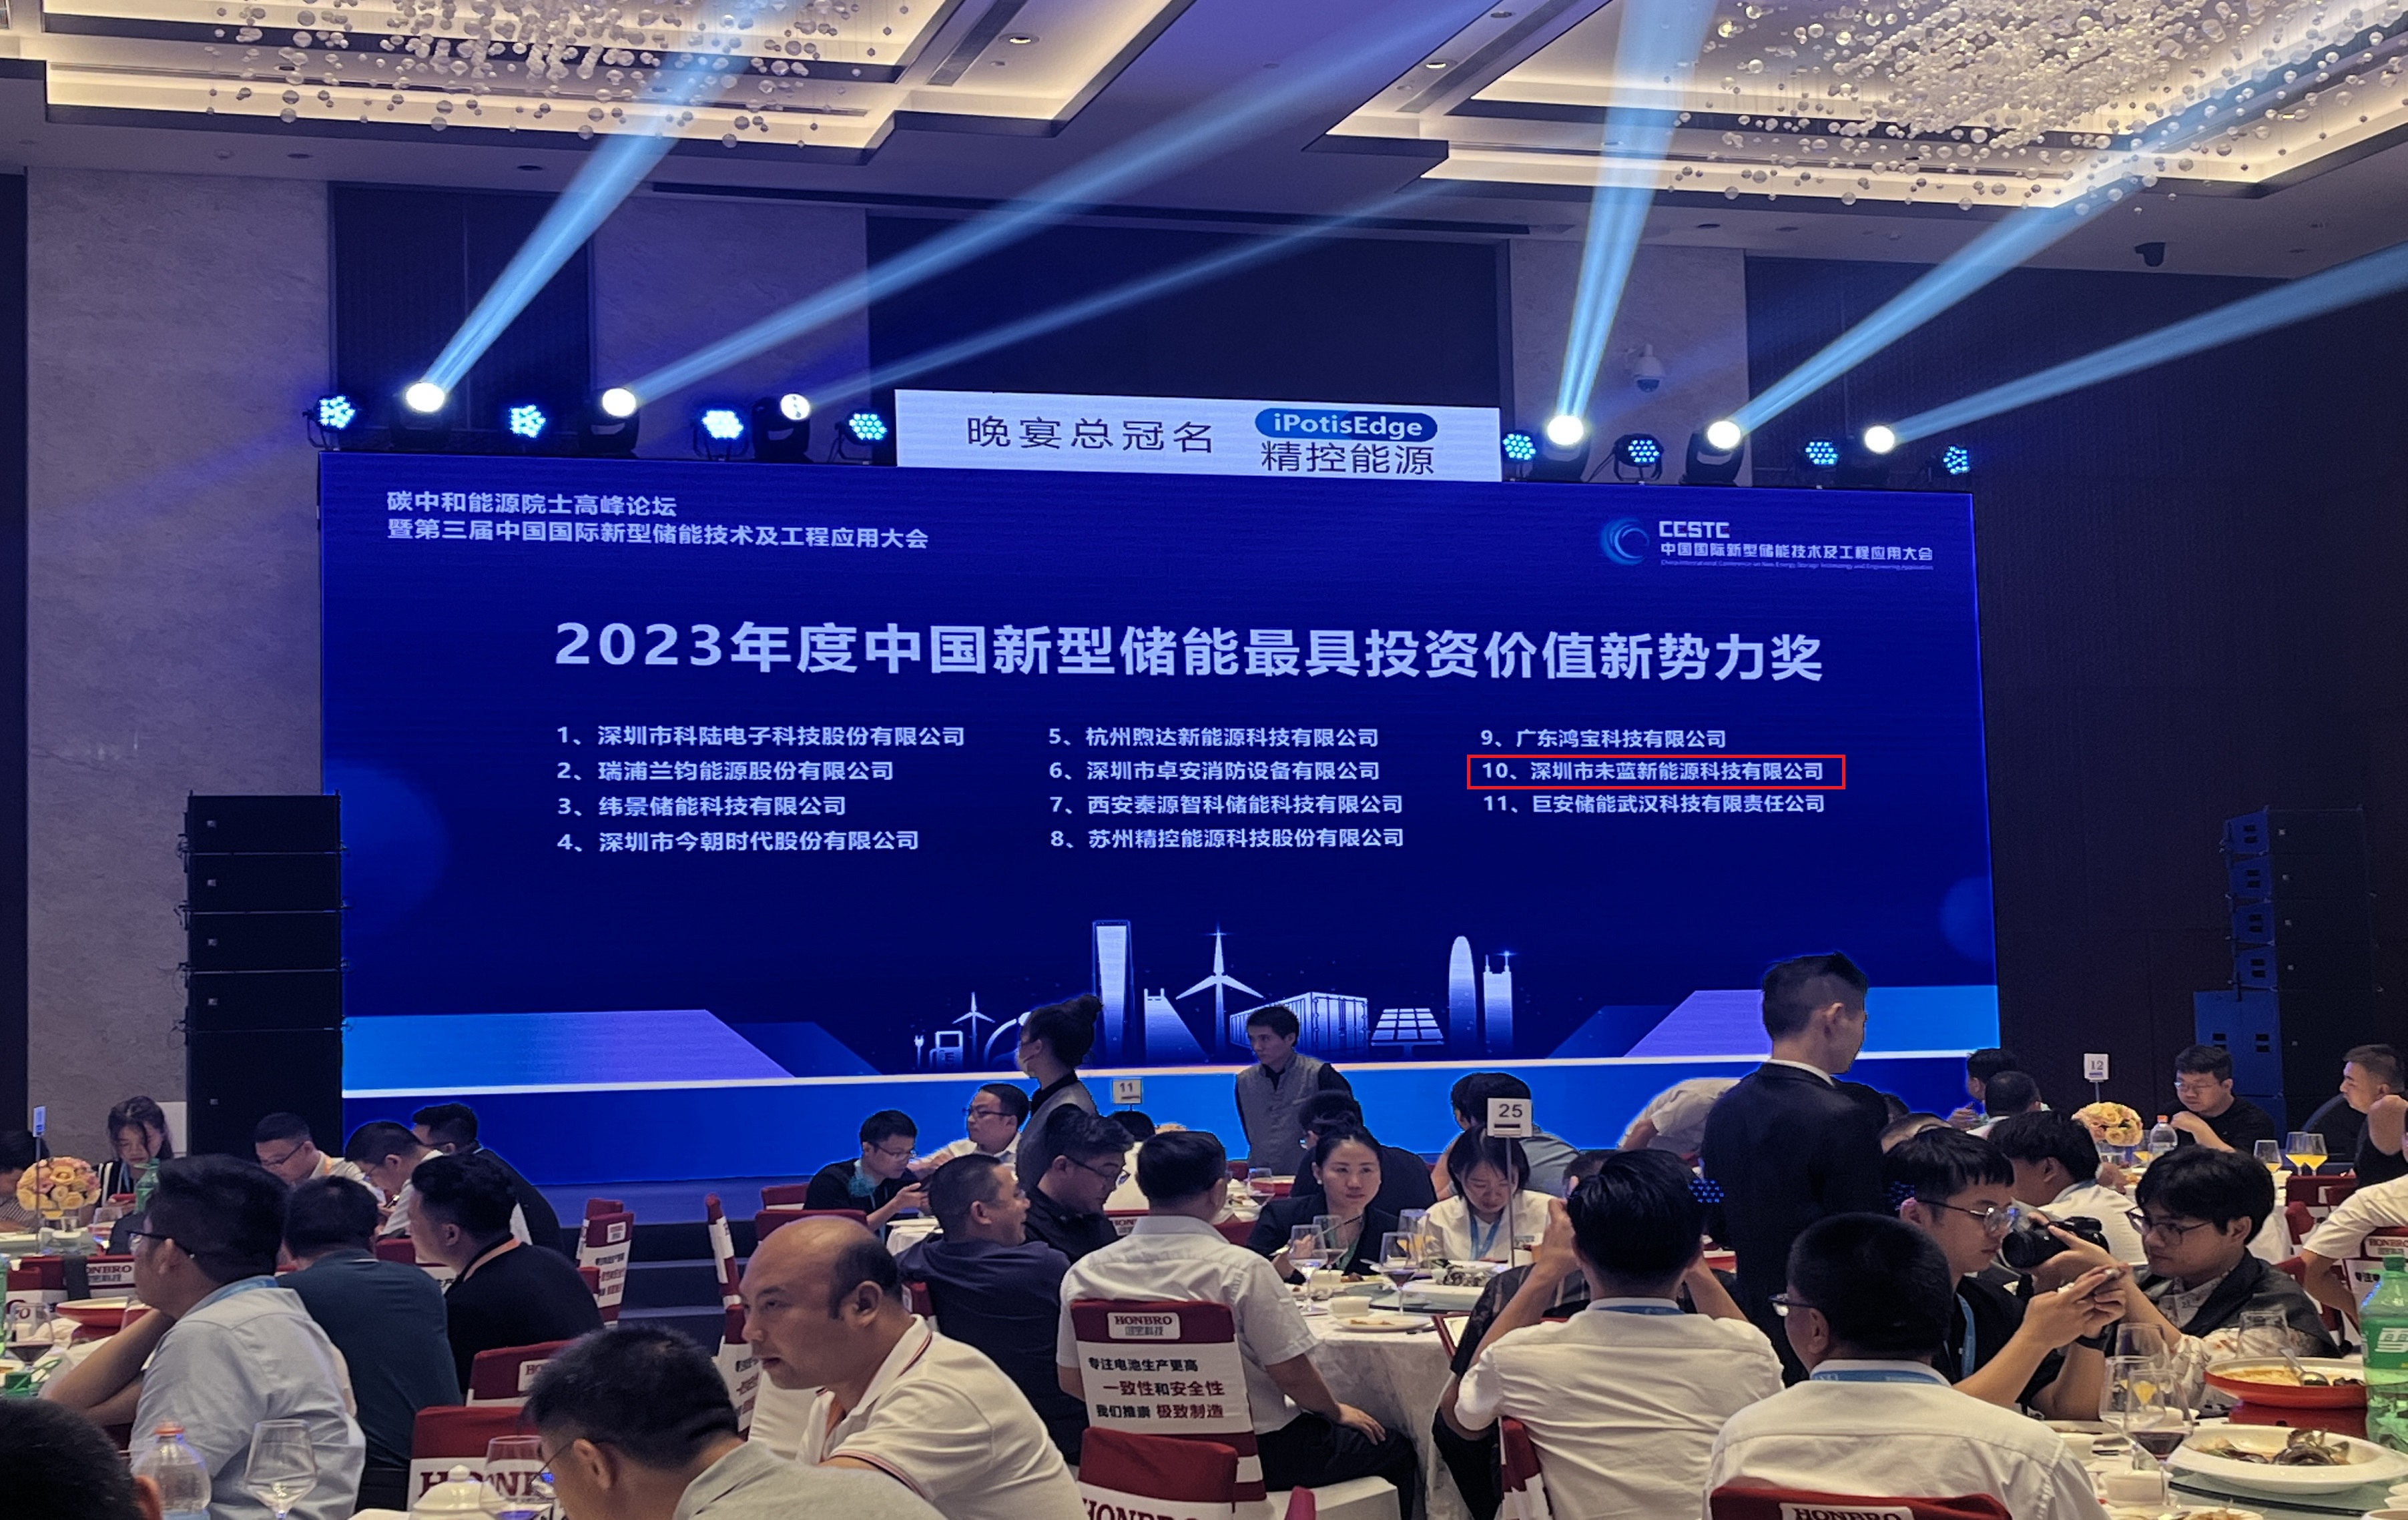 Vilion won the "2023 China New Energy Storage Most Valuable Investment New Force Award"